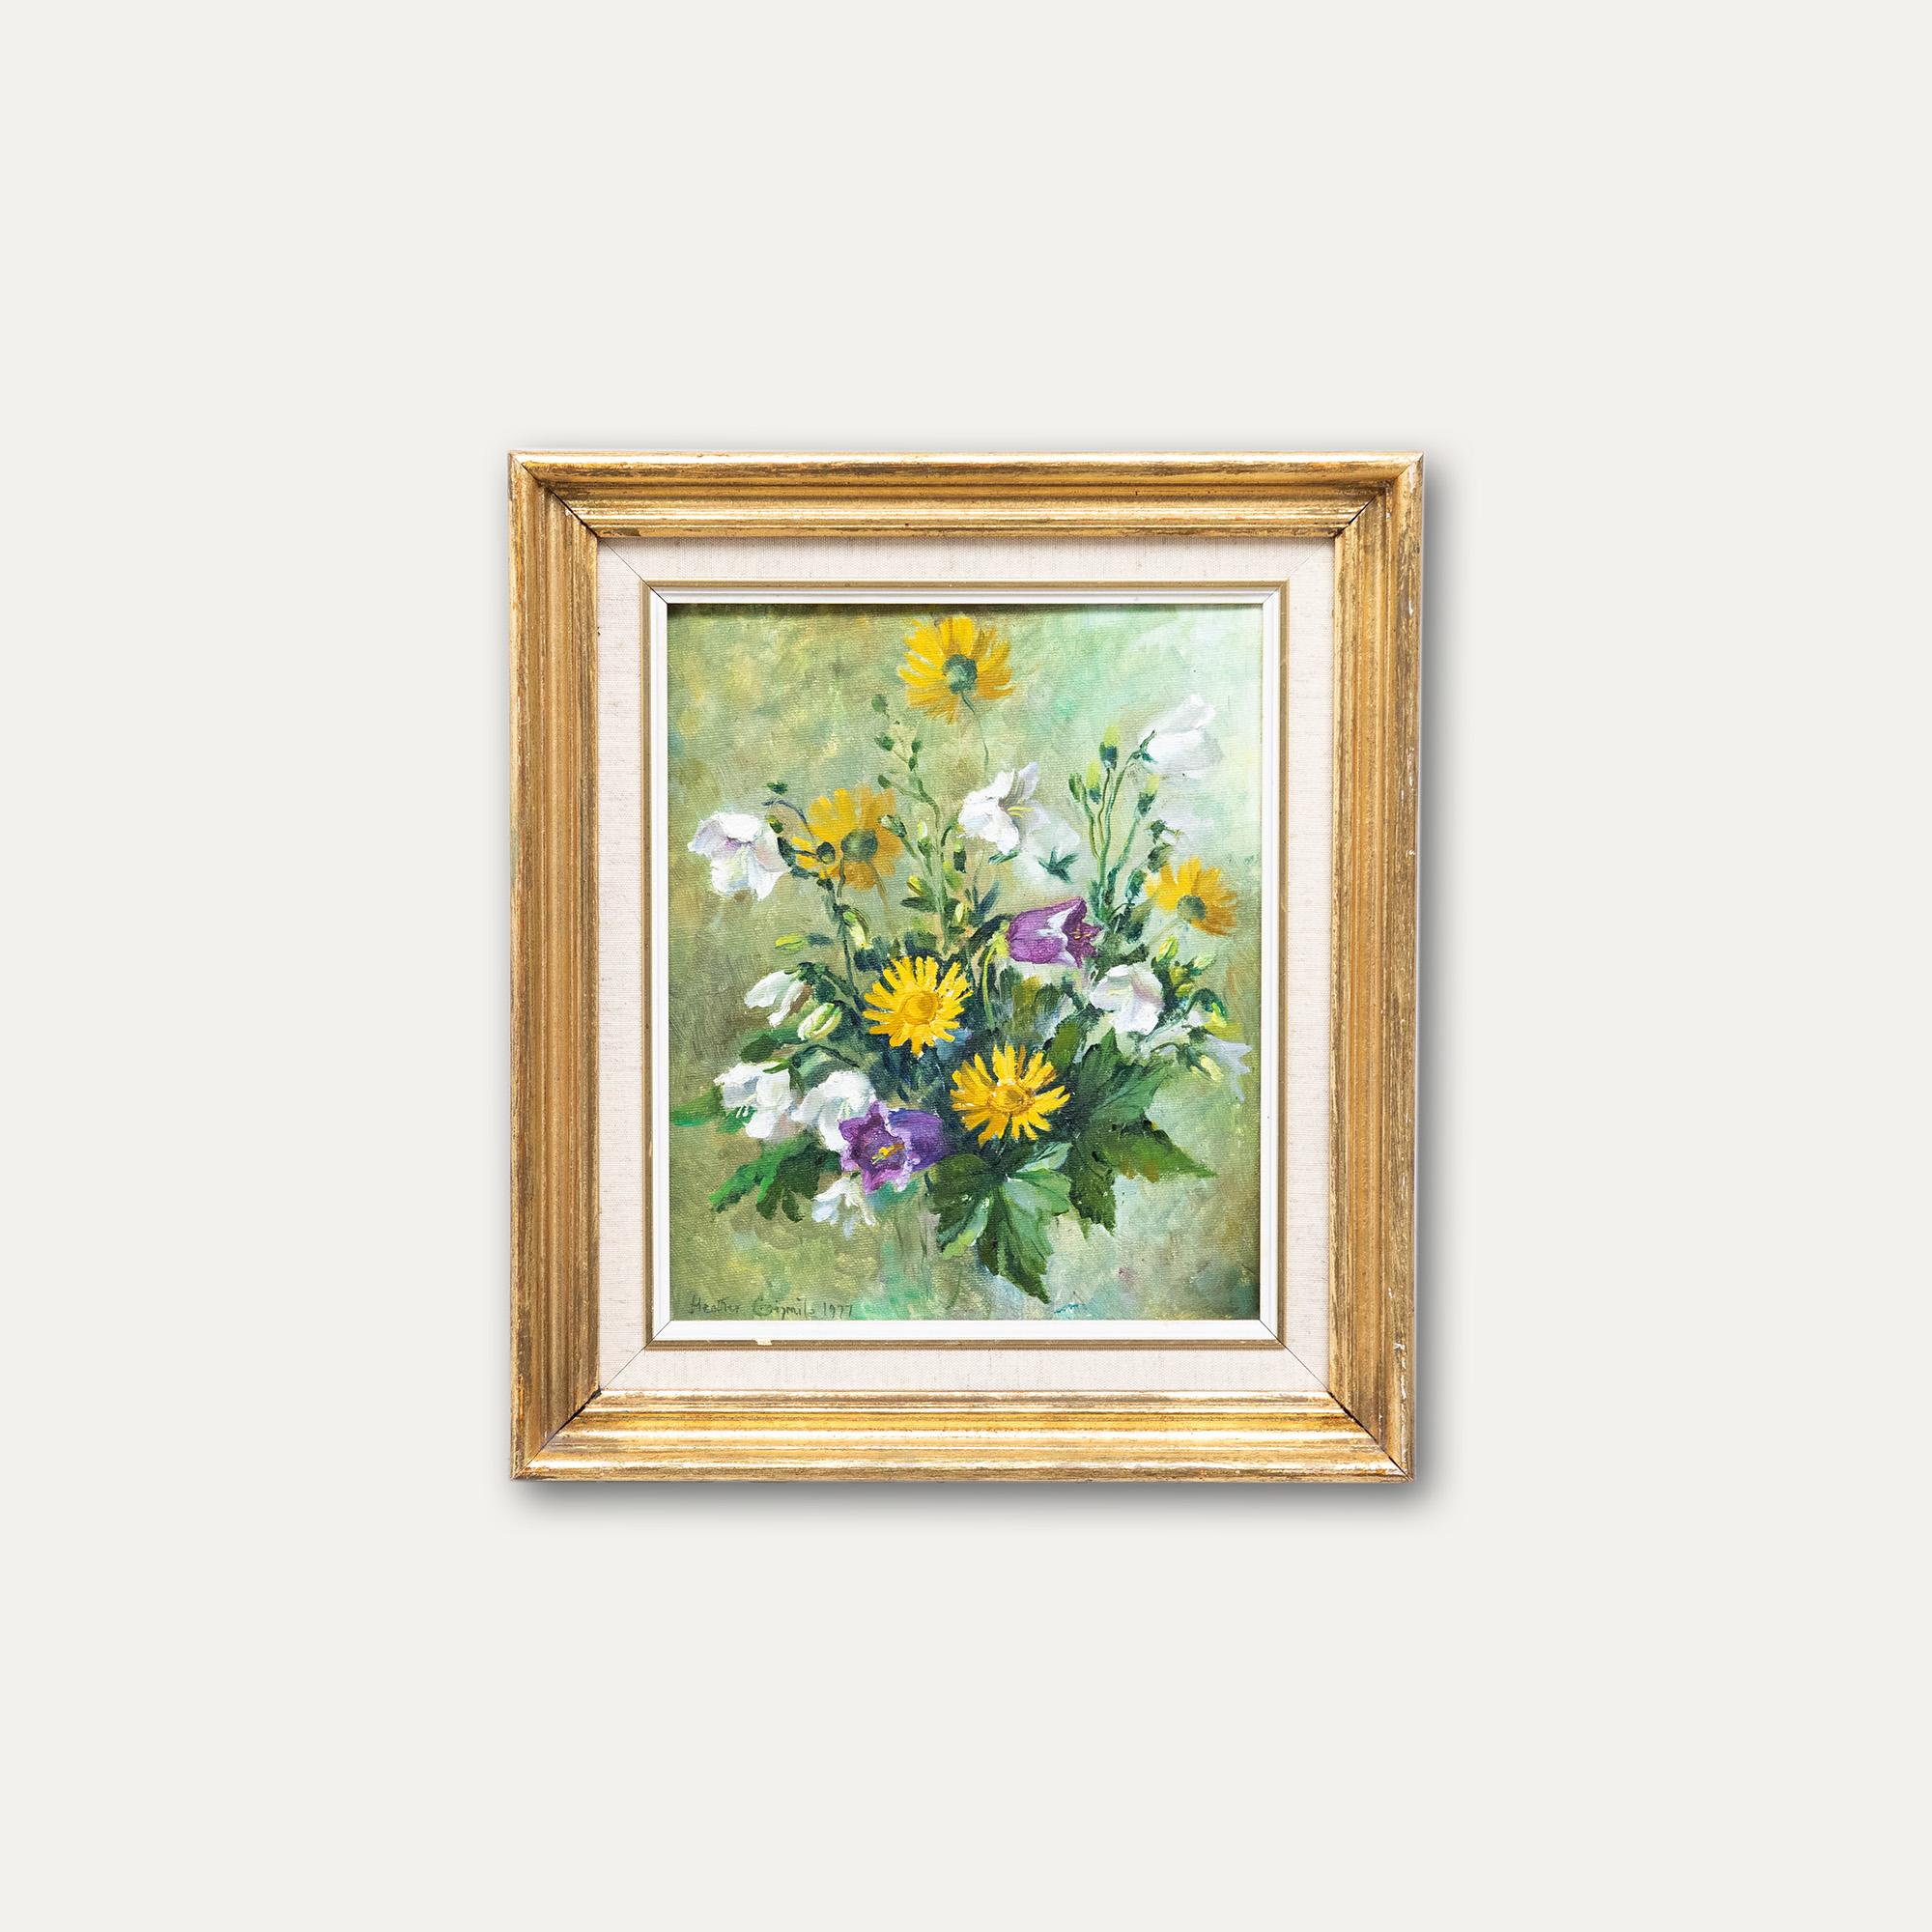 Heather Craigmile- original oil painting. Signed and dated (1977)to the lower left. Presented in an attractive gilt-effect frame with a soft linen slip. On canvas on stretchers.
